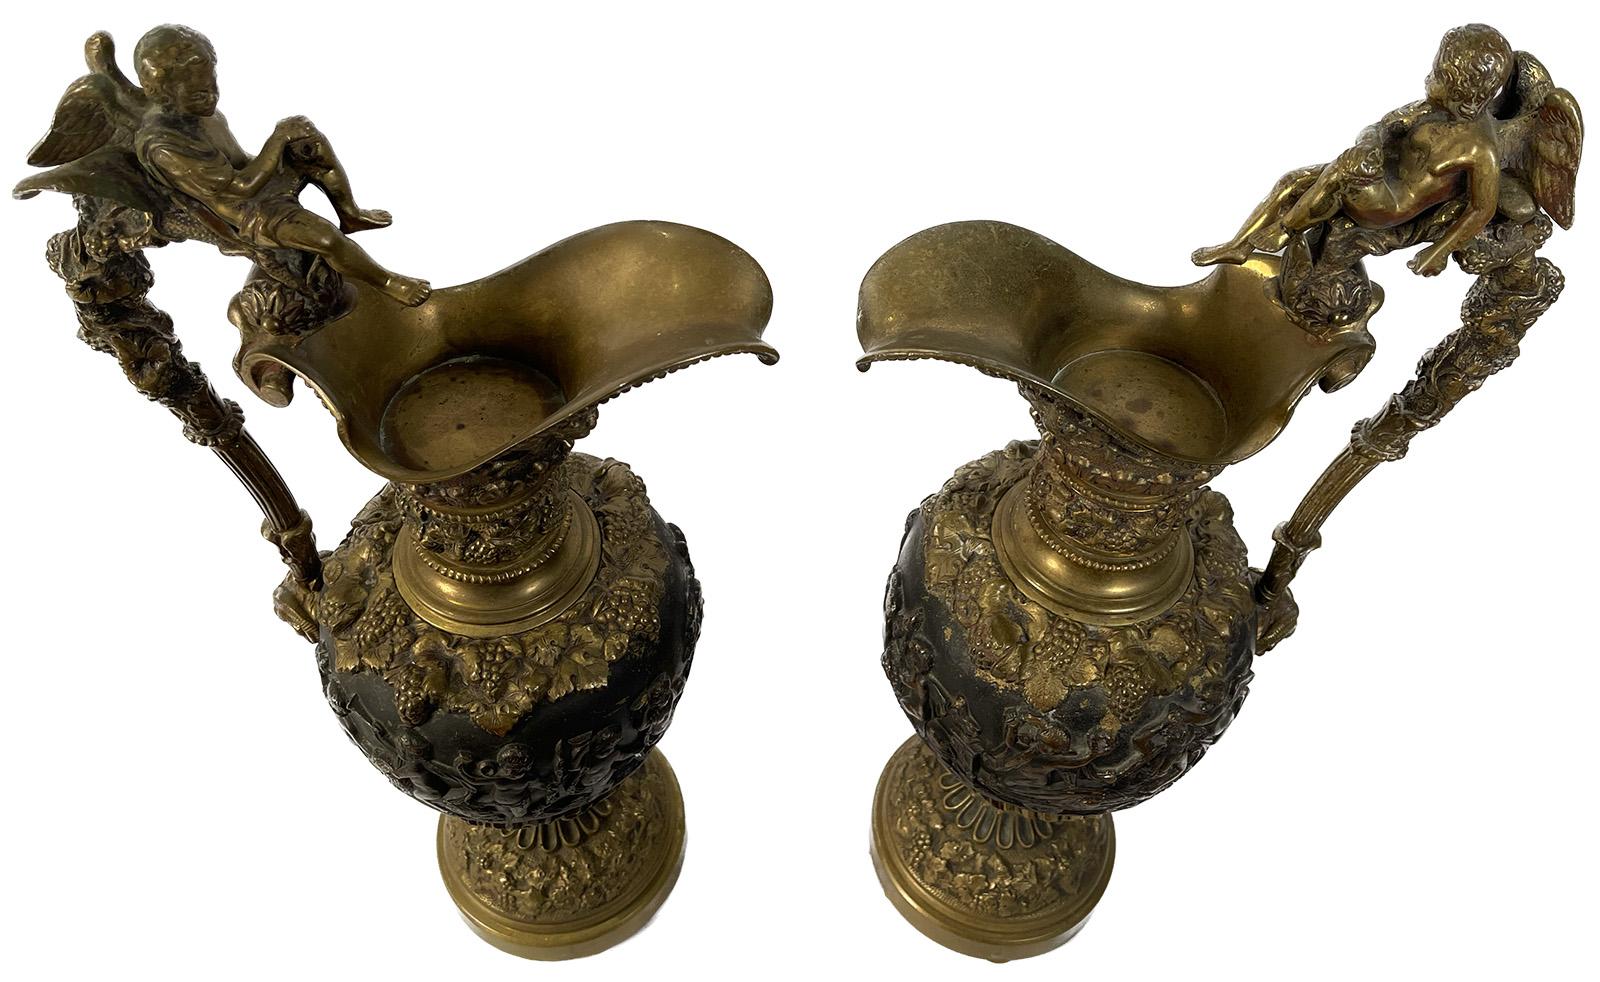 A pair of 19th century bronze ewers with figures.

Dimensions: 21